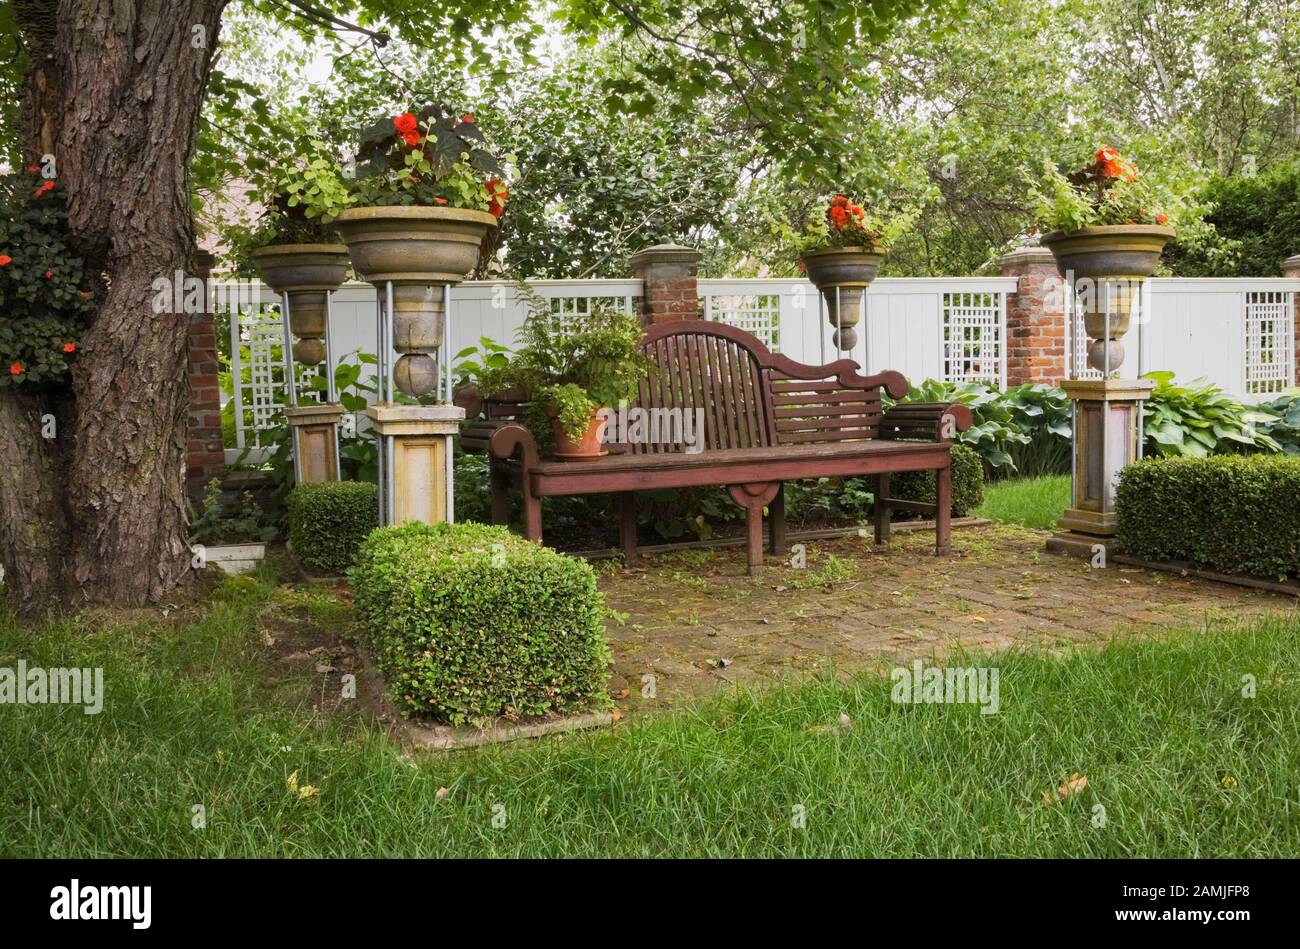 Brown Lutyens wooden sitting bench on paving stone patio bordered by Buxus 'Green Gem' - Boxwood shrub hedges, pedestal planters with red flowers. Stock Photo